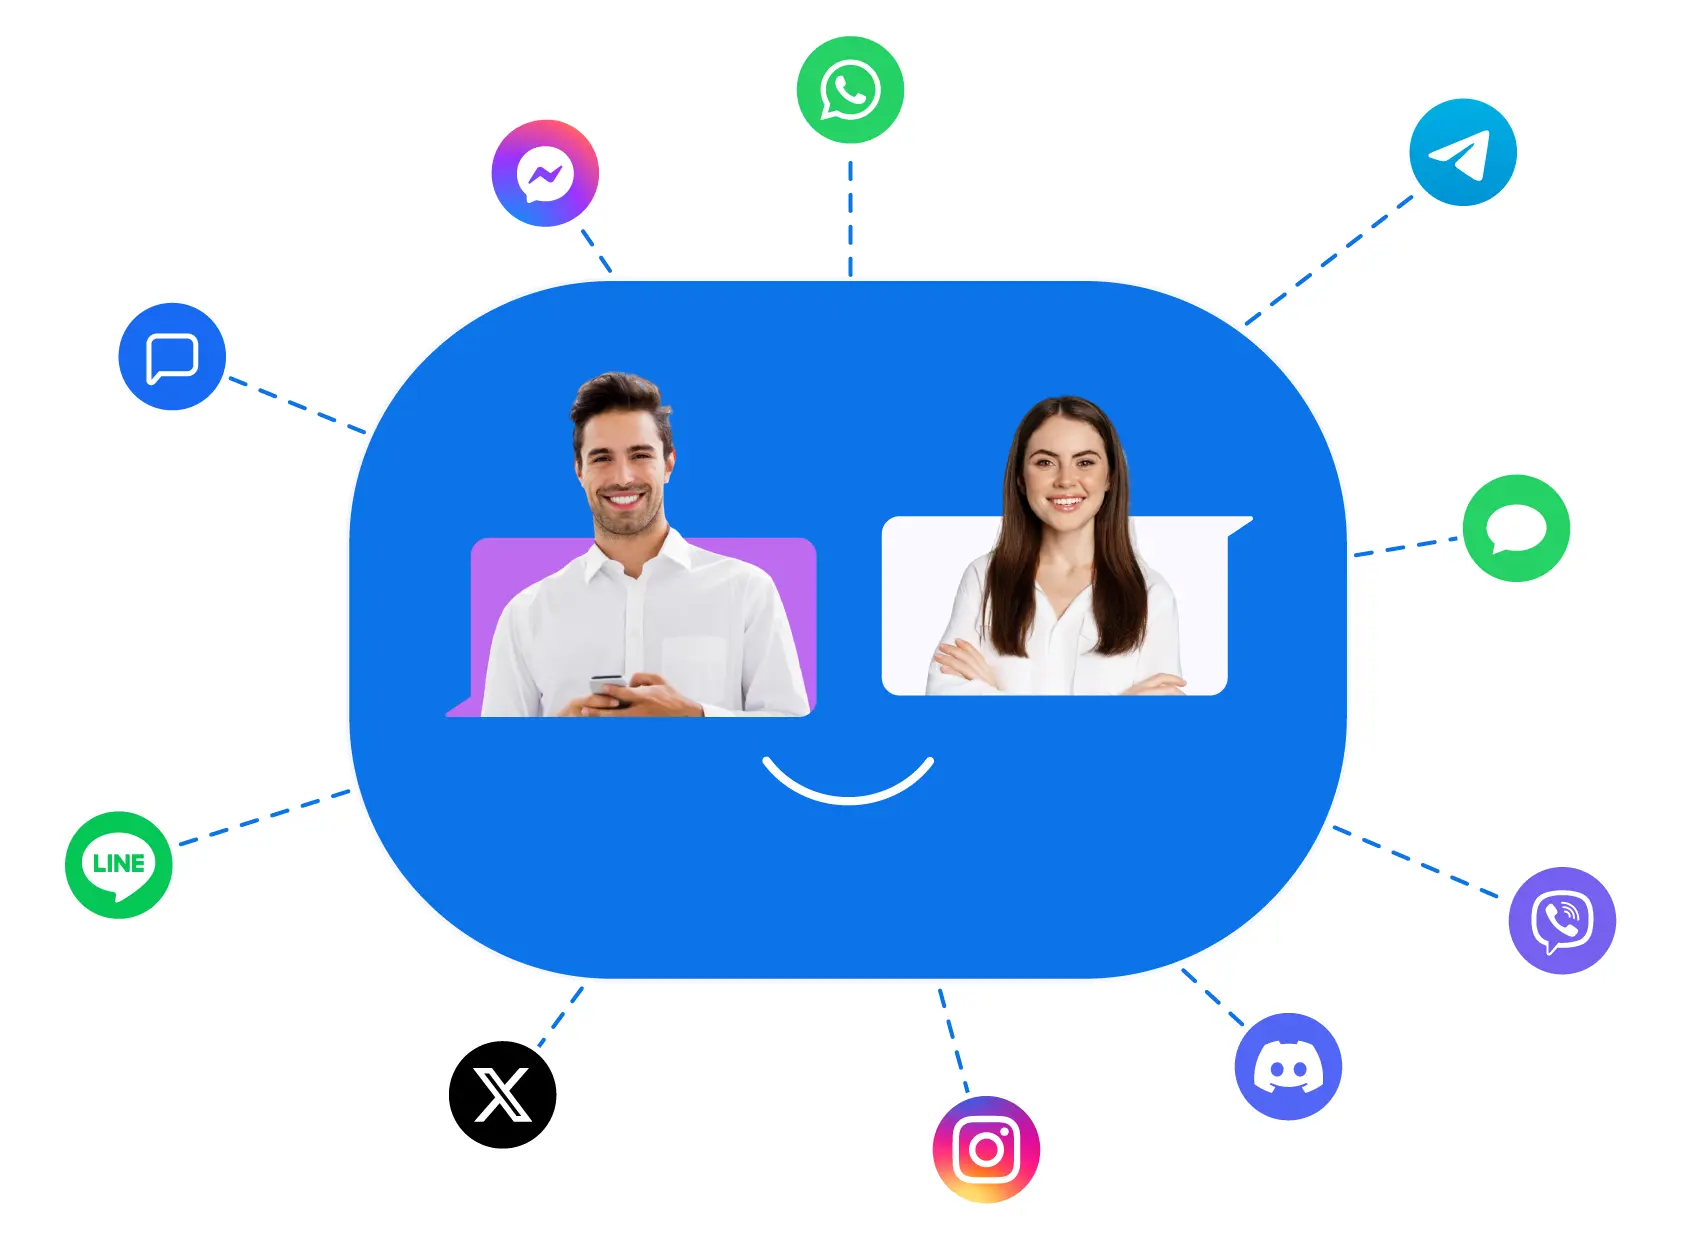 Connecting people to businesses through messaging apps and omnichannel messaging